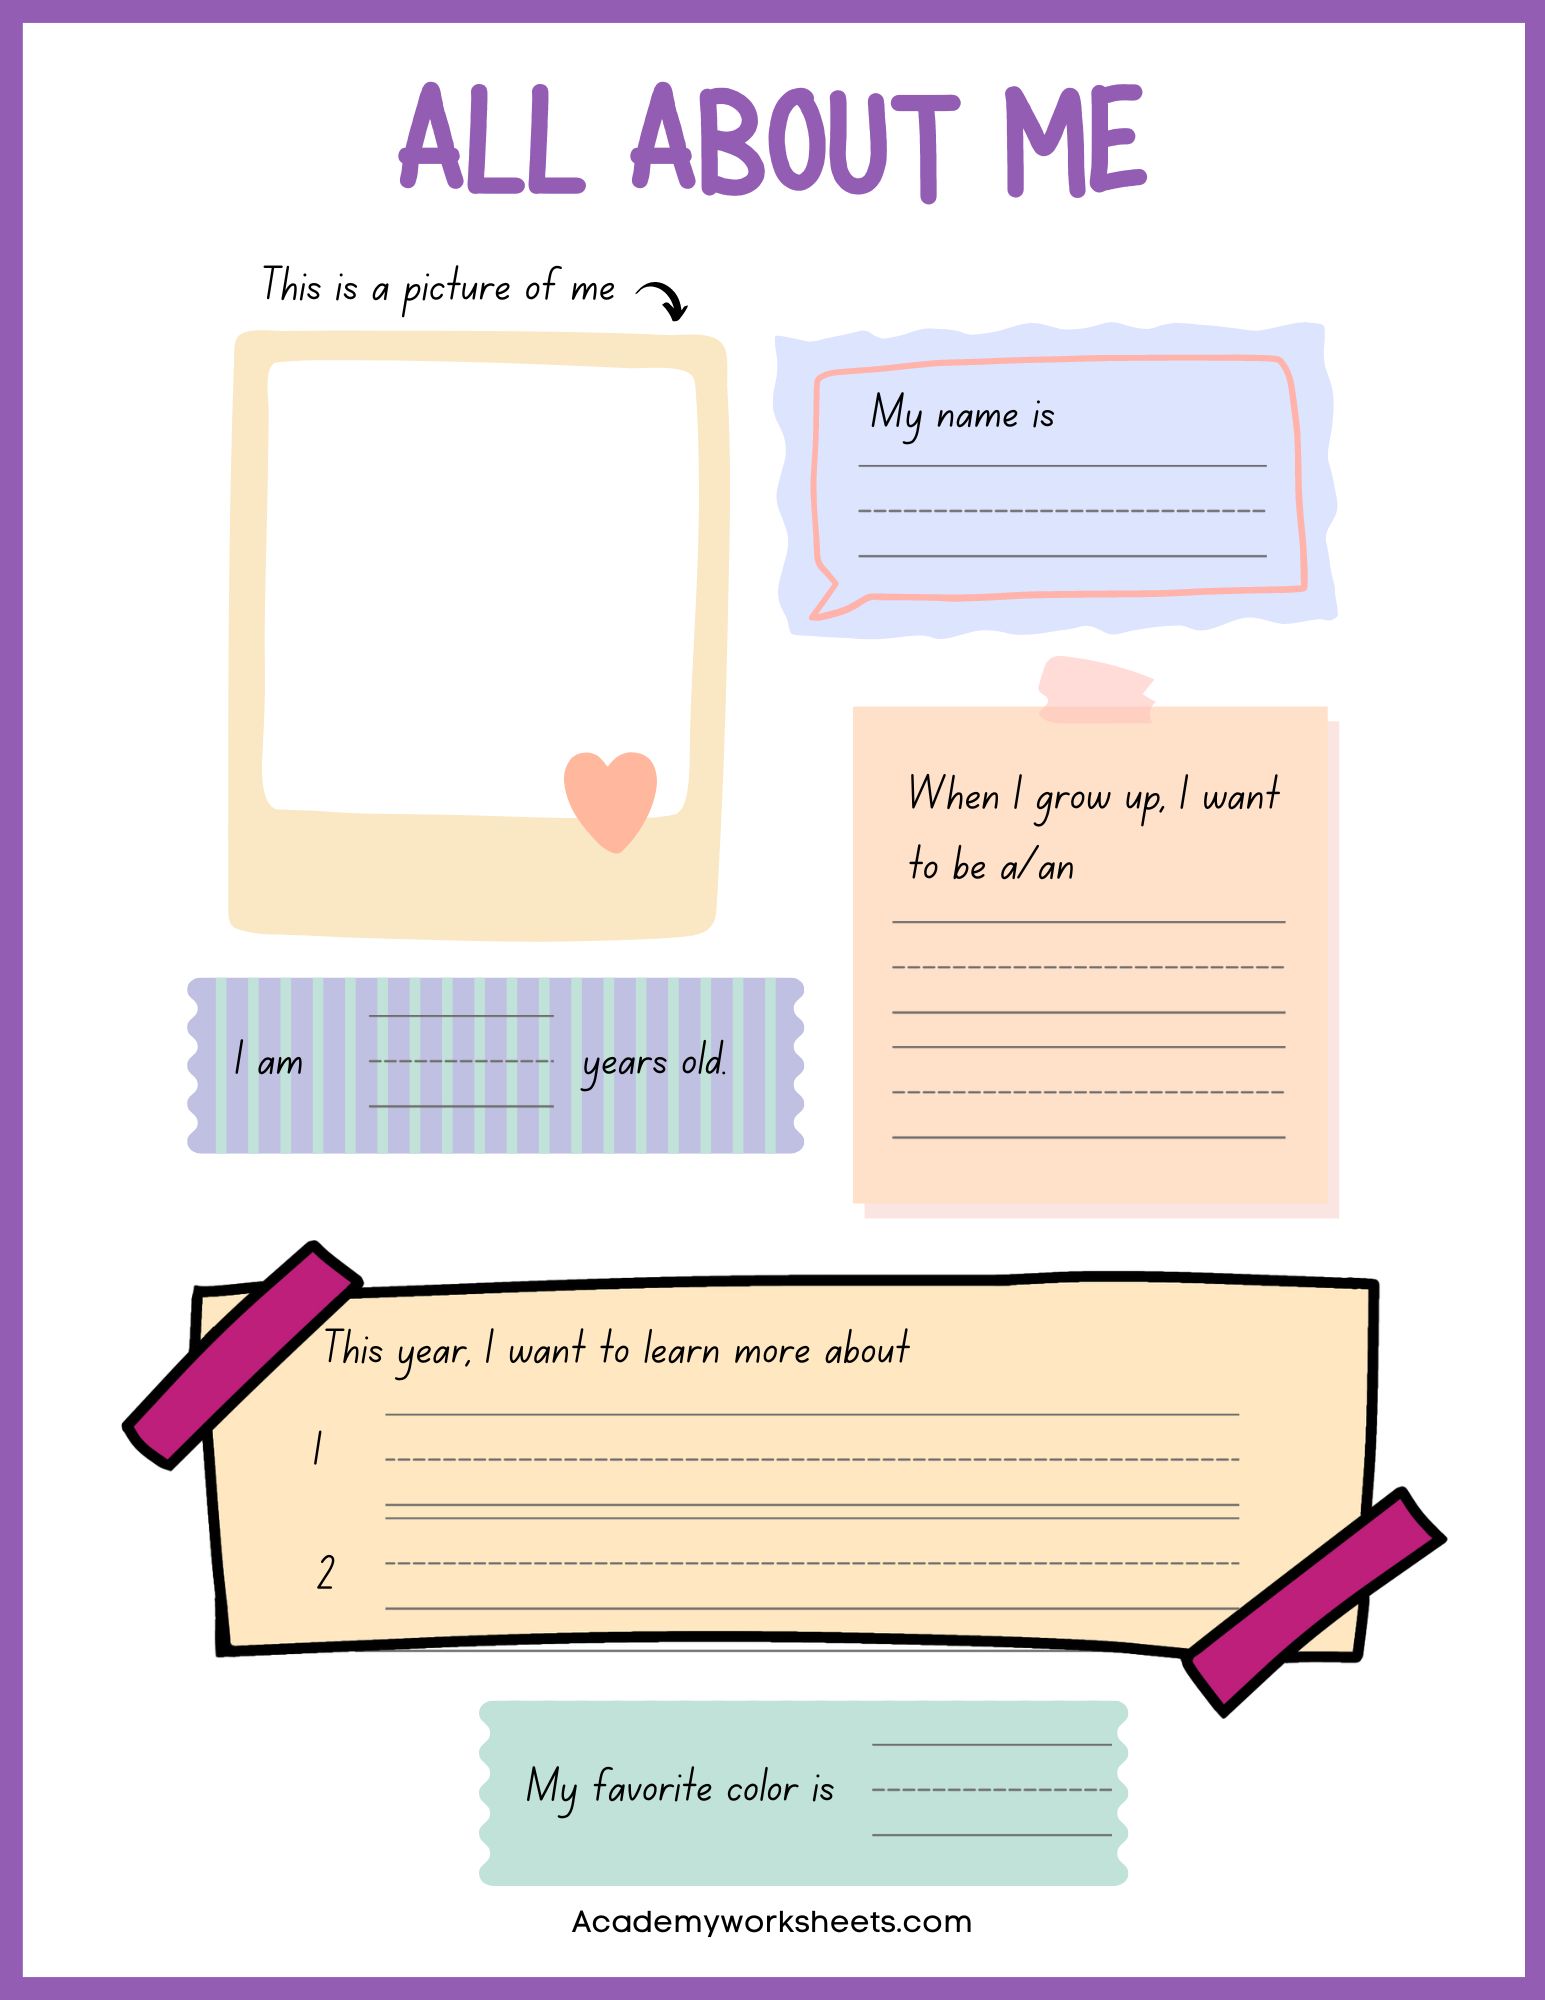 Top 7 All About Me Free Printable Worksheets for kindergarten